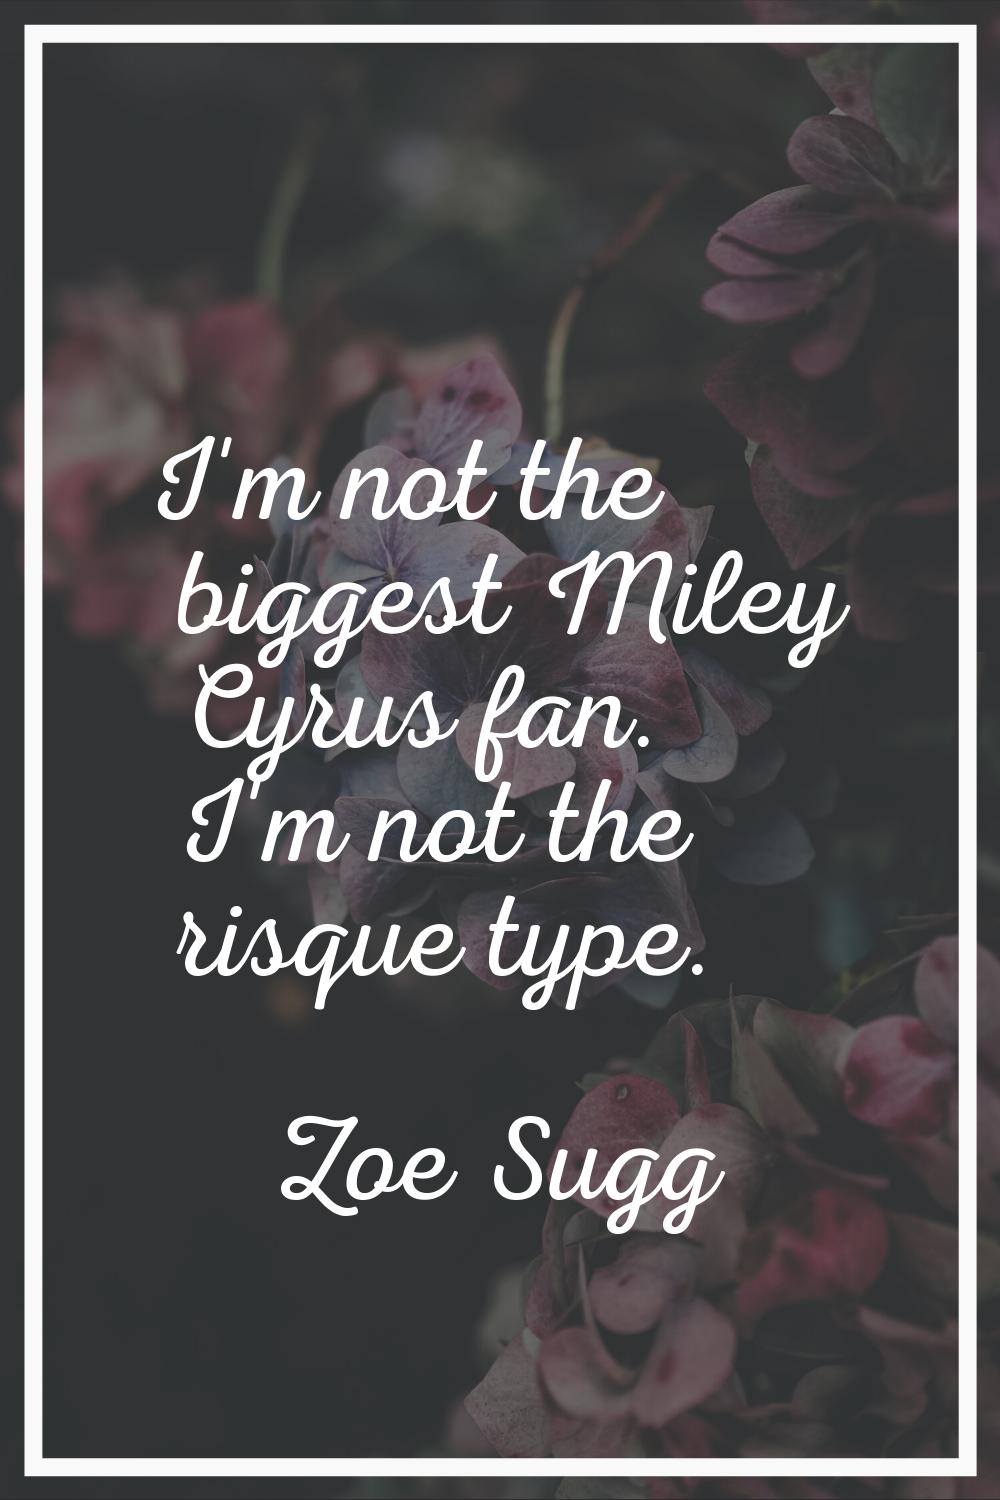 I'm not the biggest Miley Cyrus fan. I'm not the risque type.